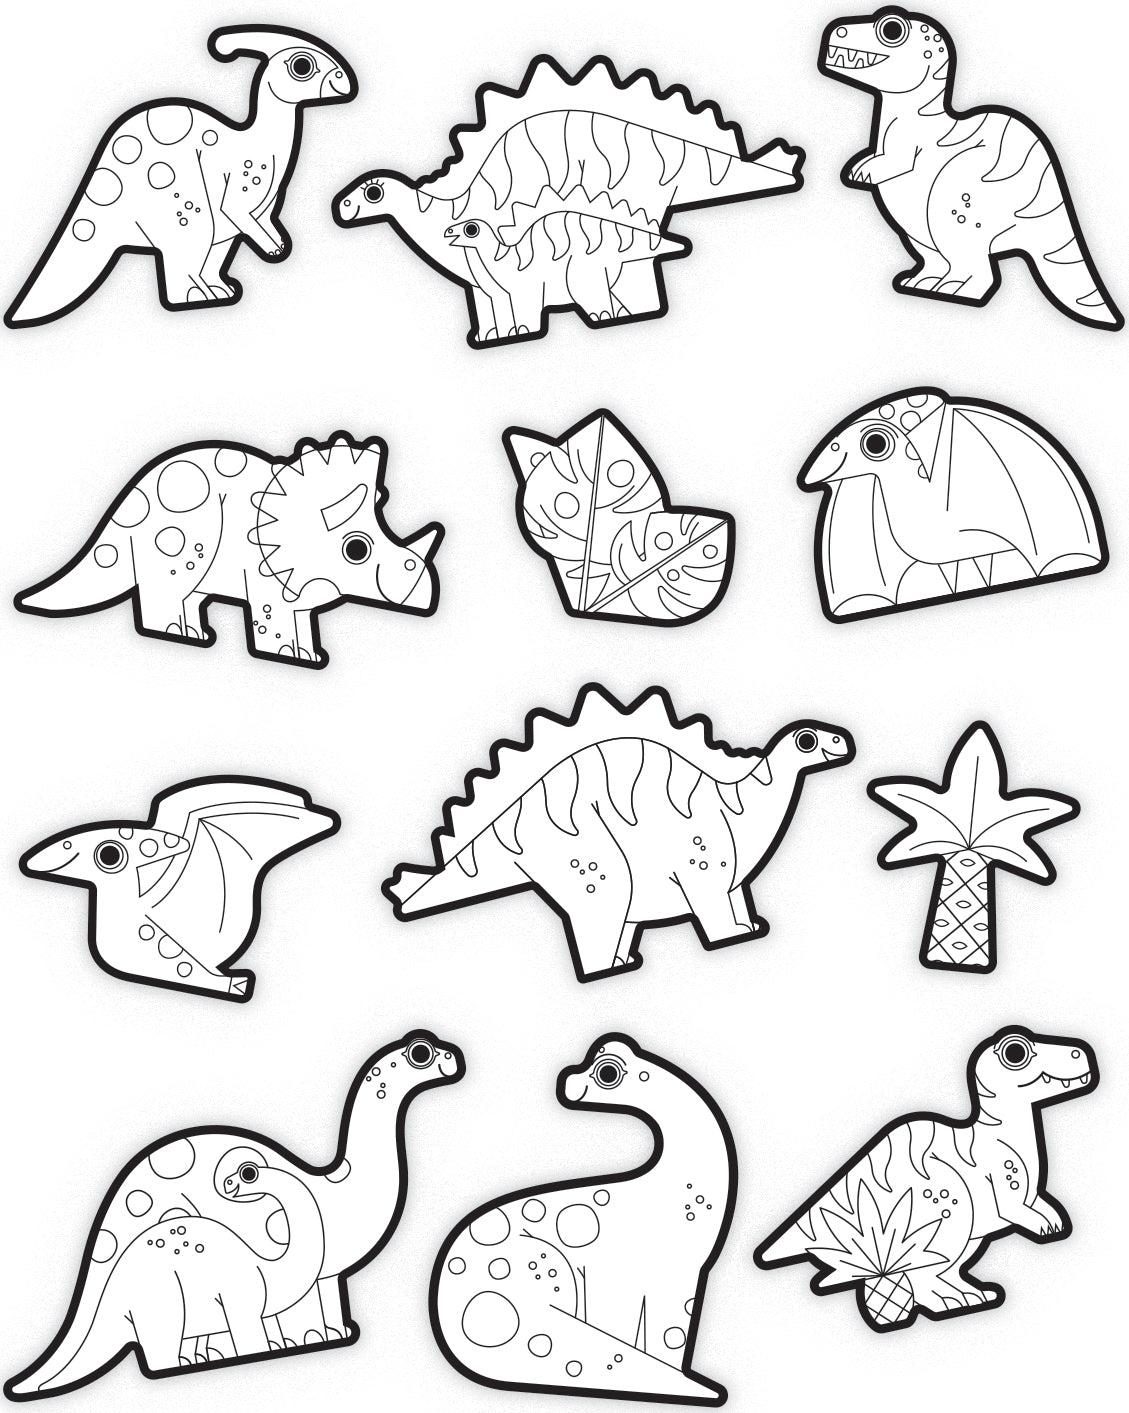 Coloring Stickers: Dinosaurs